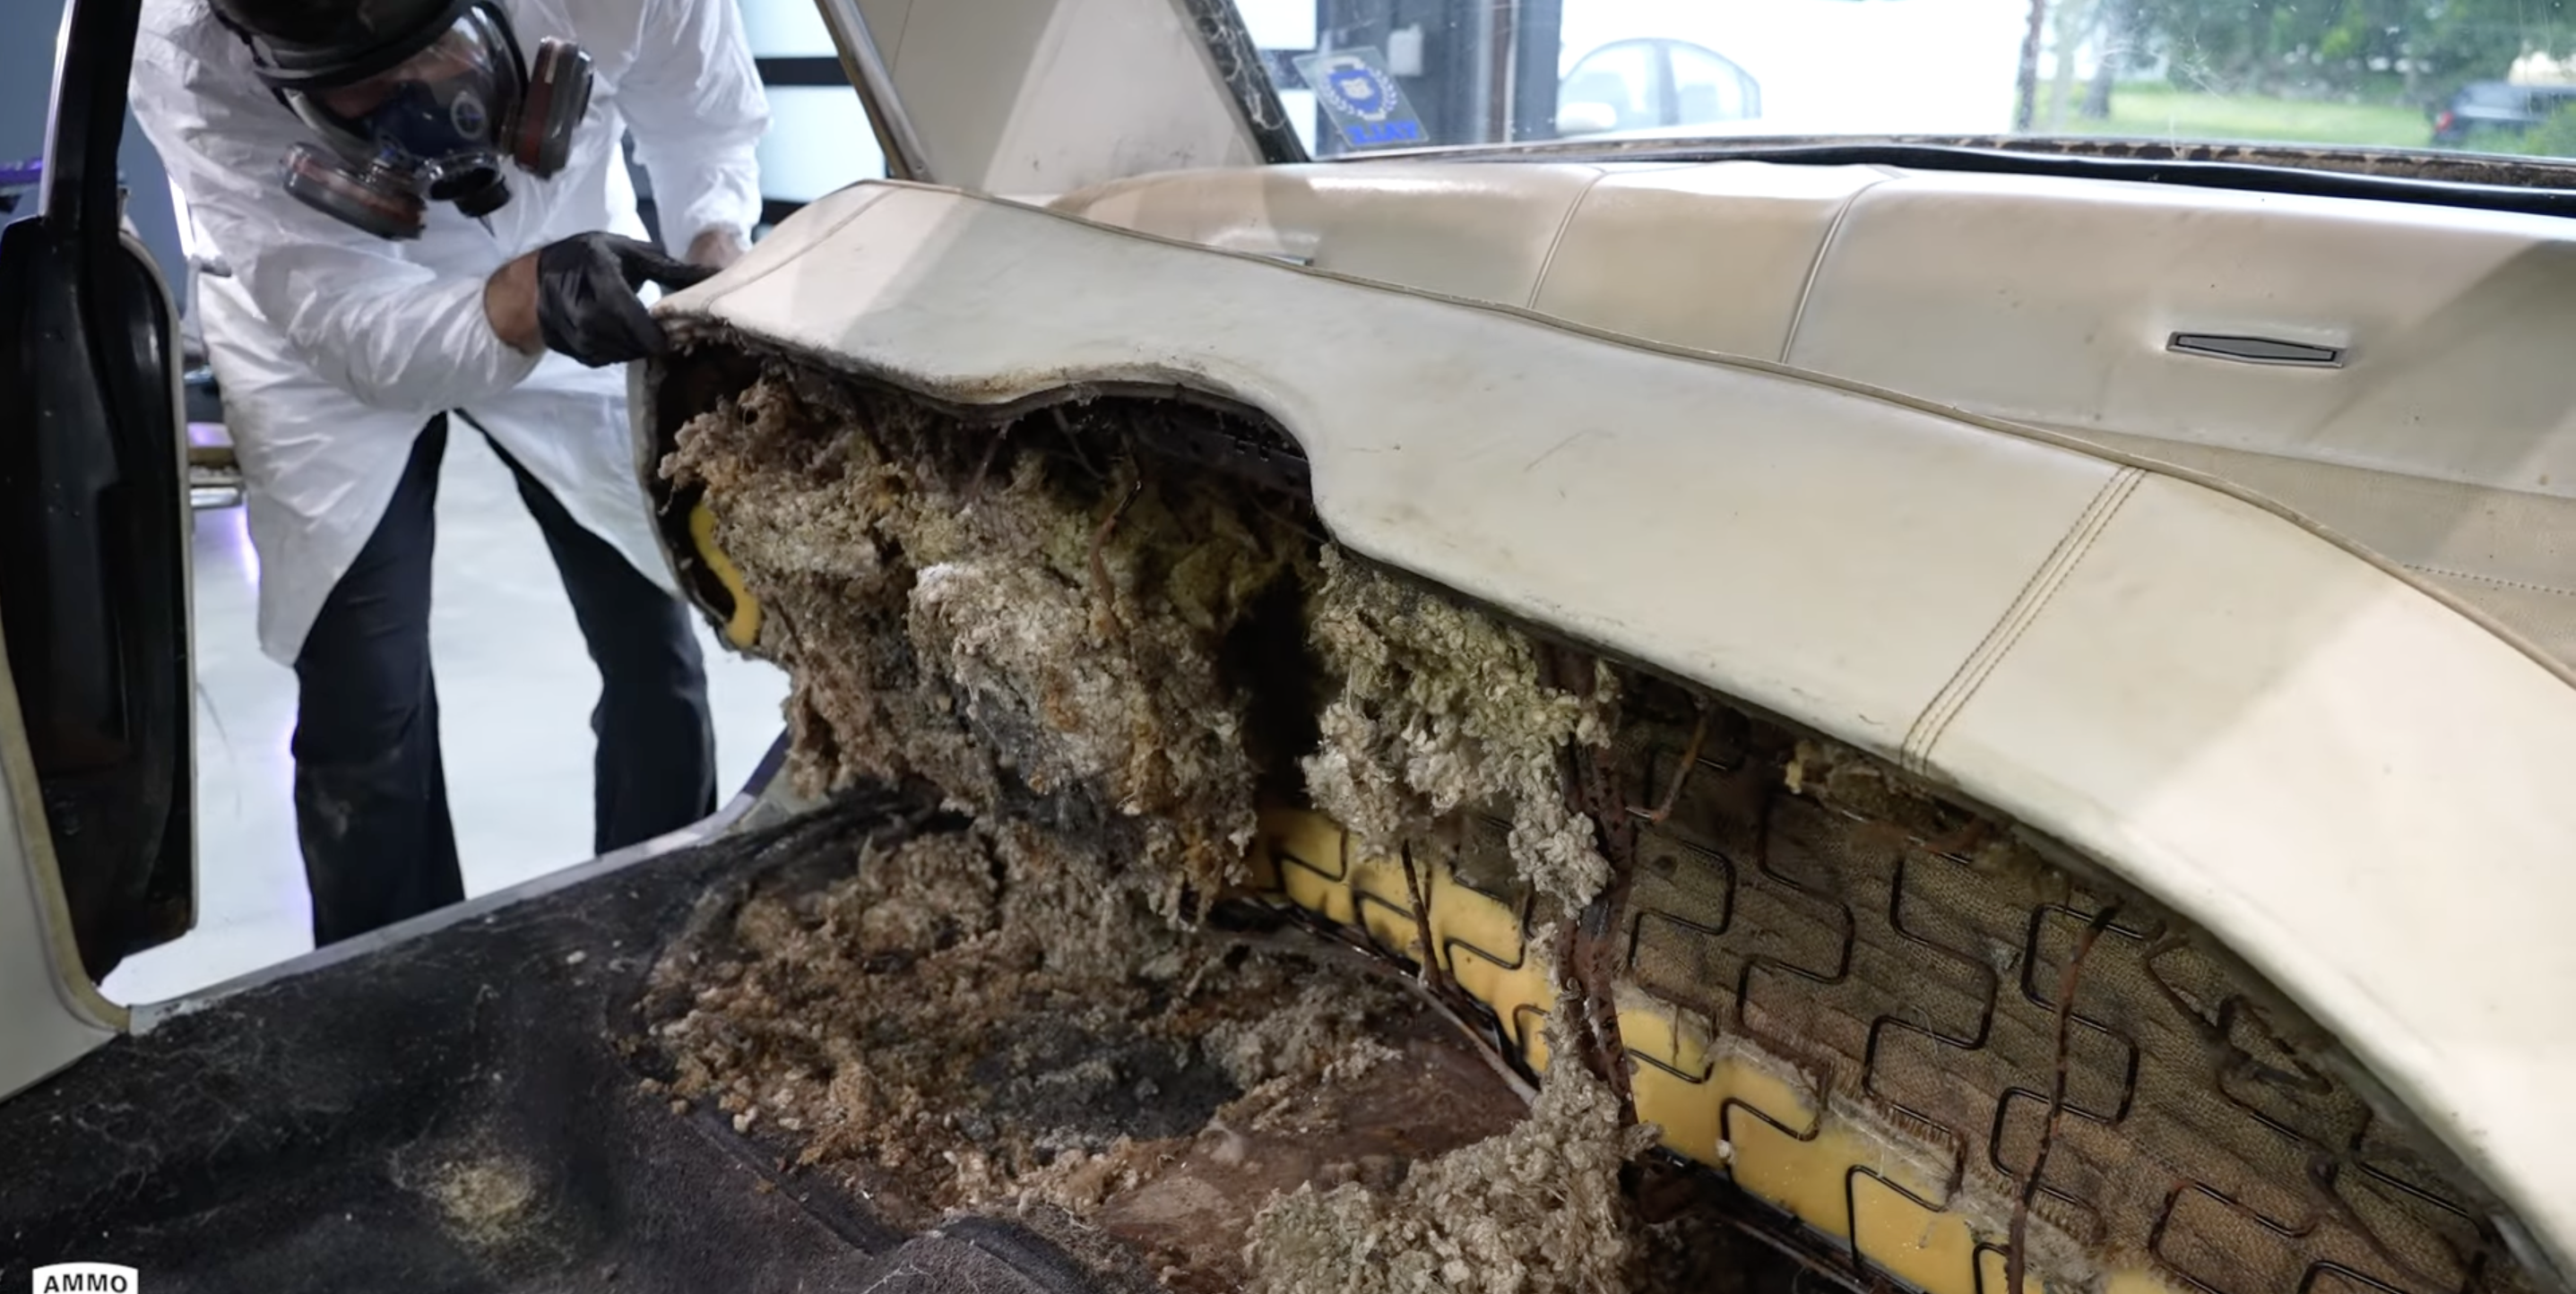 This Rat-Infested Mercury Montclair Barn Find Will Make You Gag